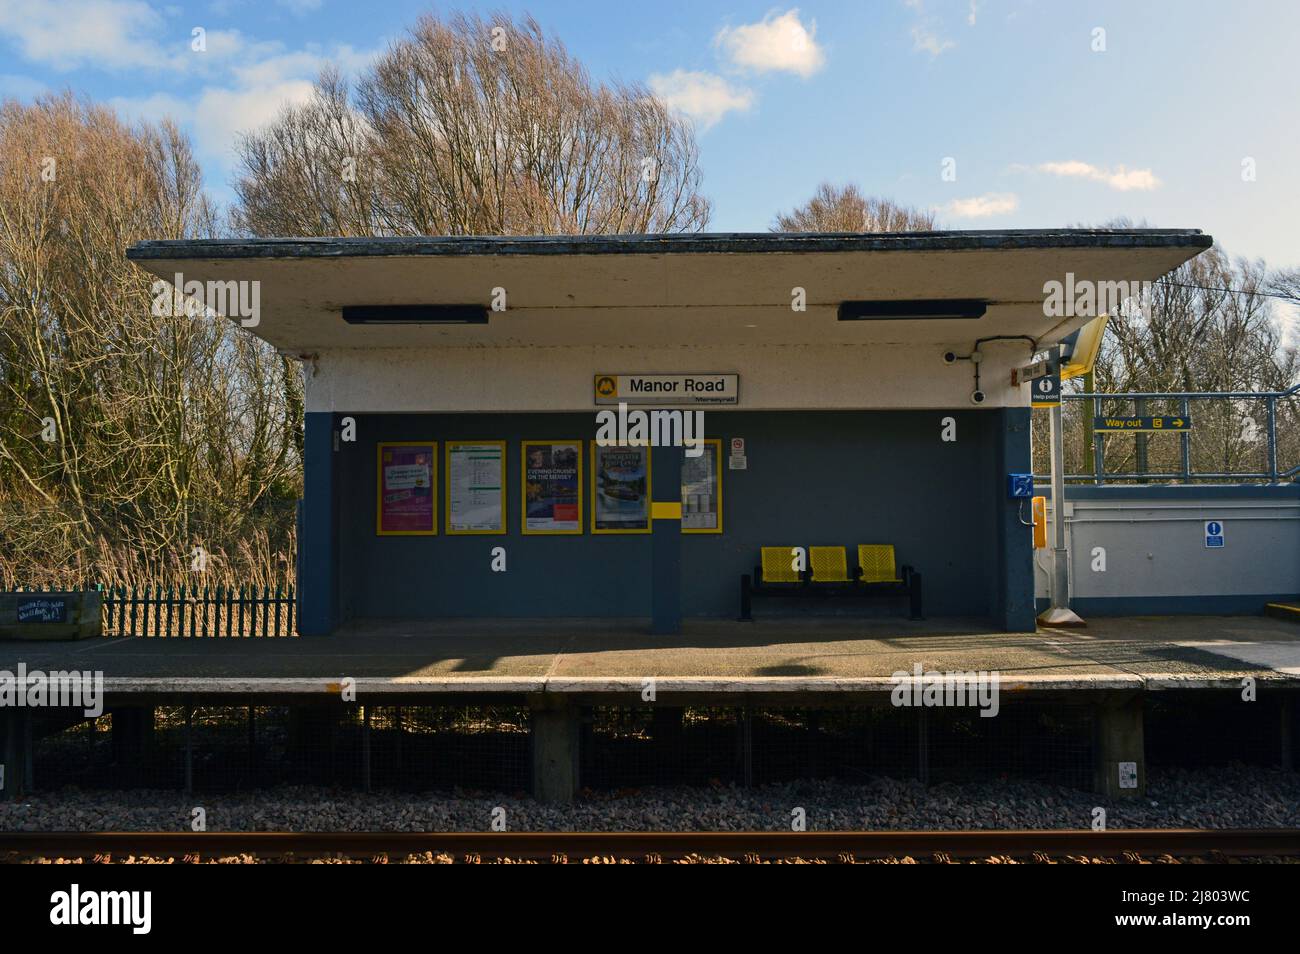 MANOR ROAD. WIRRAL. ENGLAND. 03-12-21. The platform shelter at Manor Road railway station Hoylake. on the Merseyrail electric route to West Kirby. Stock Photo